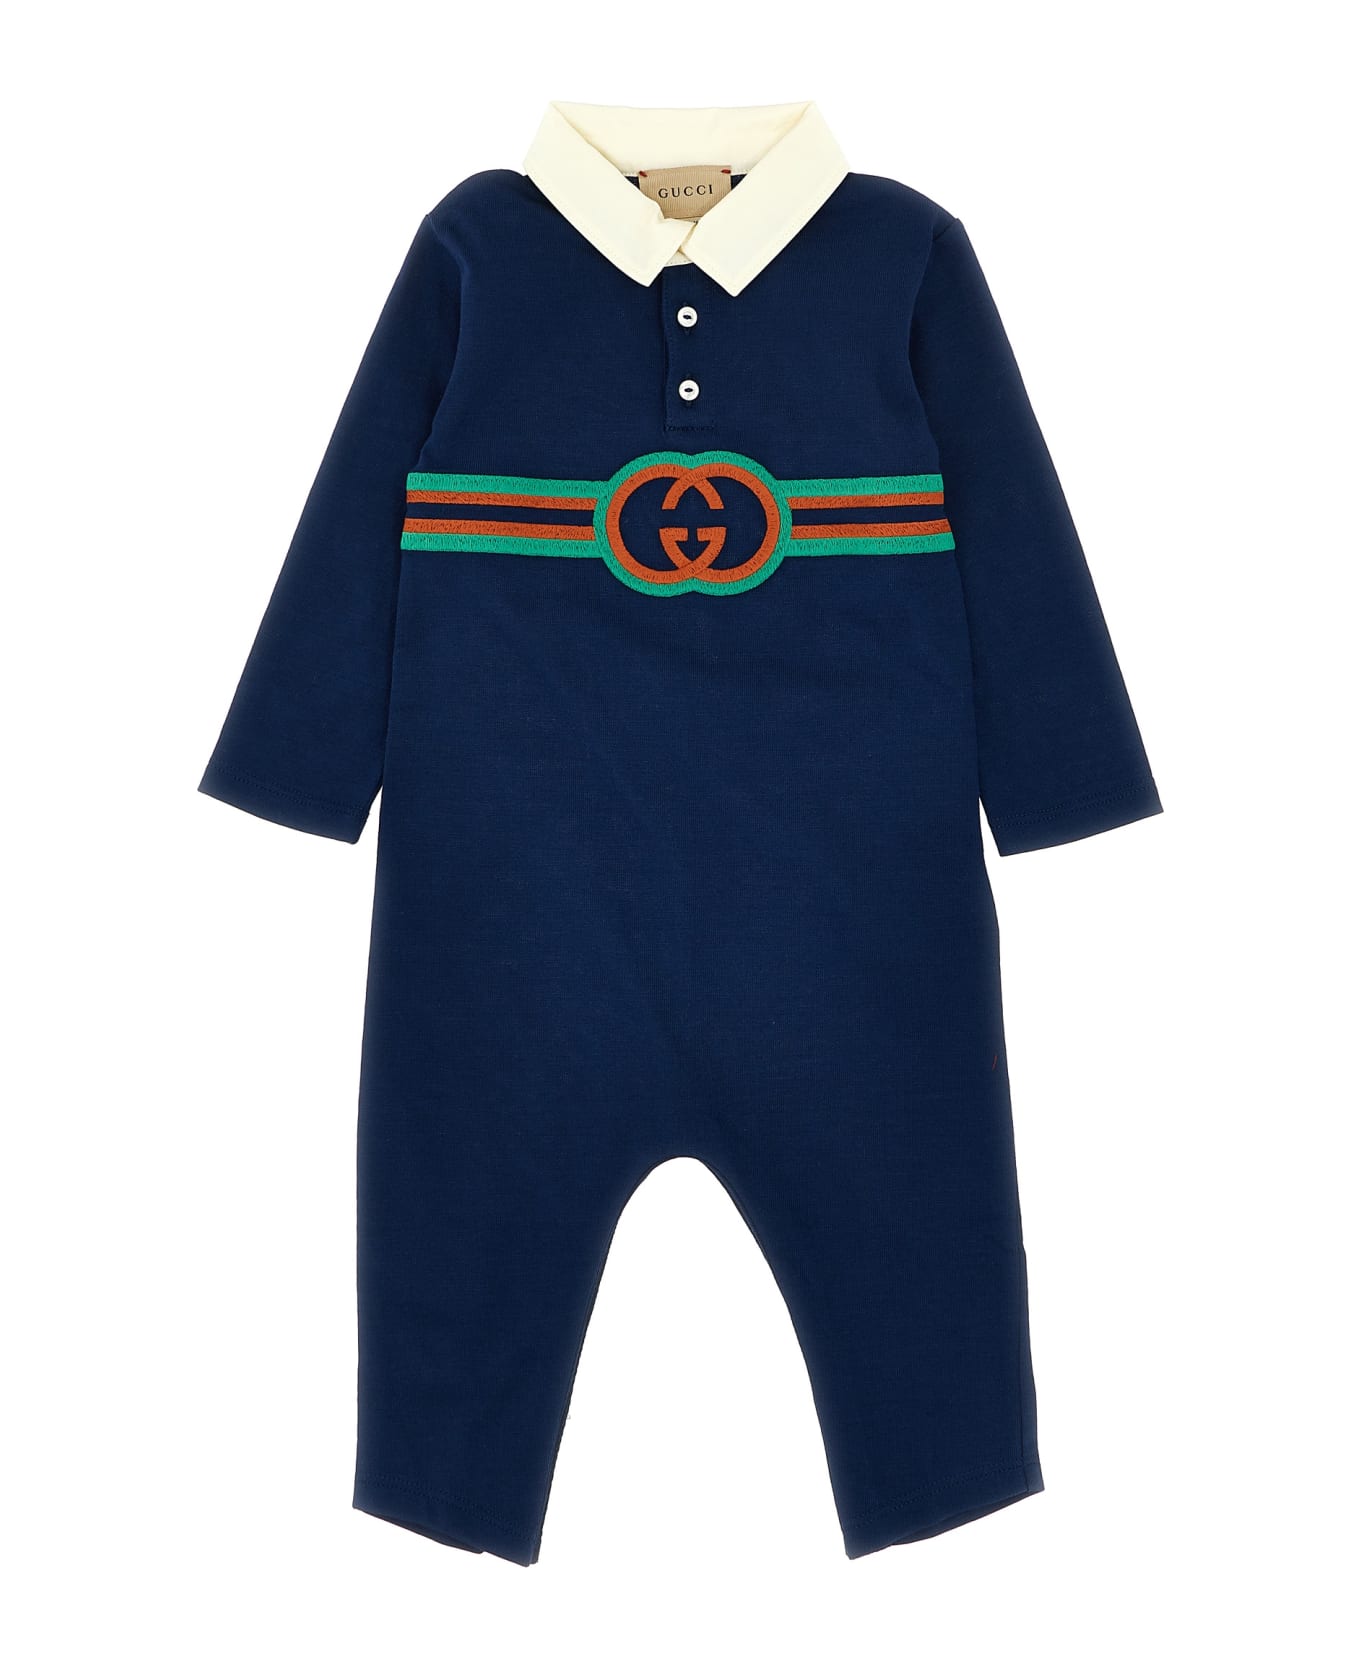 gucci spring Logo Embroidery Jumpsuit